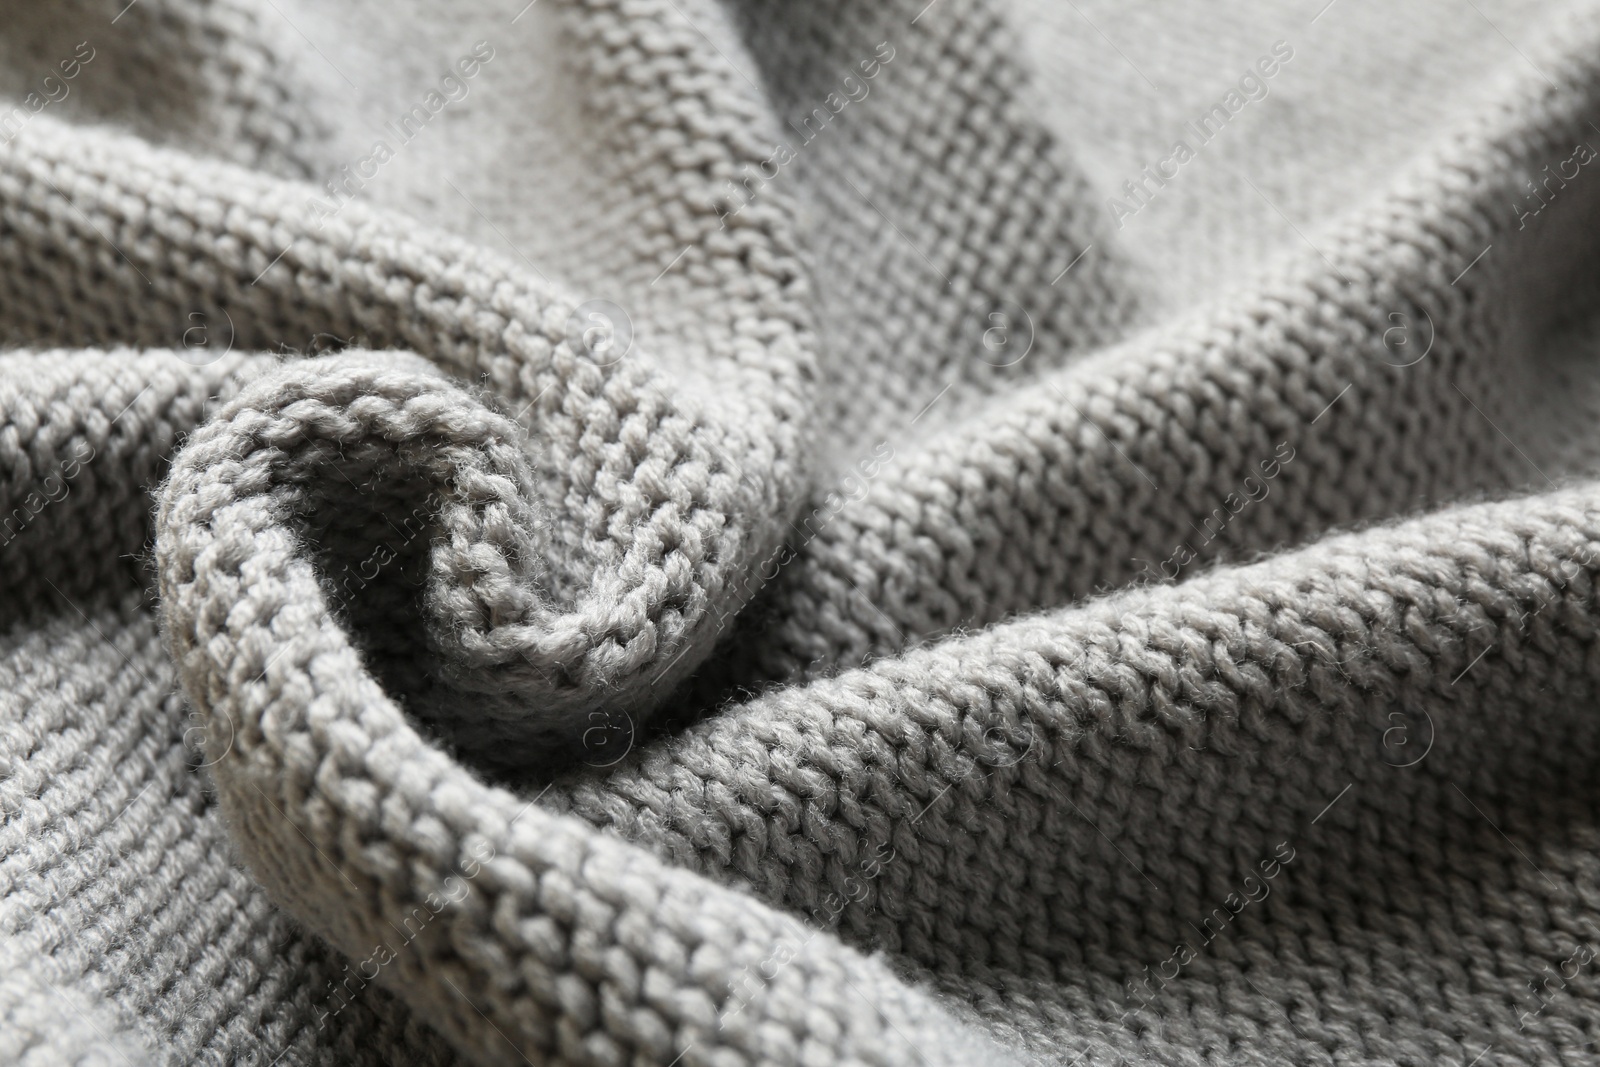 Photo of Beautiful grey knitted fabric as background, closeup